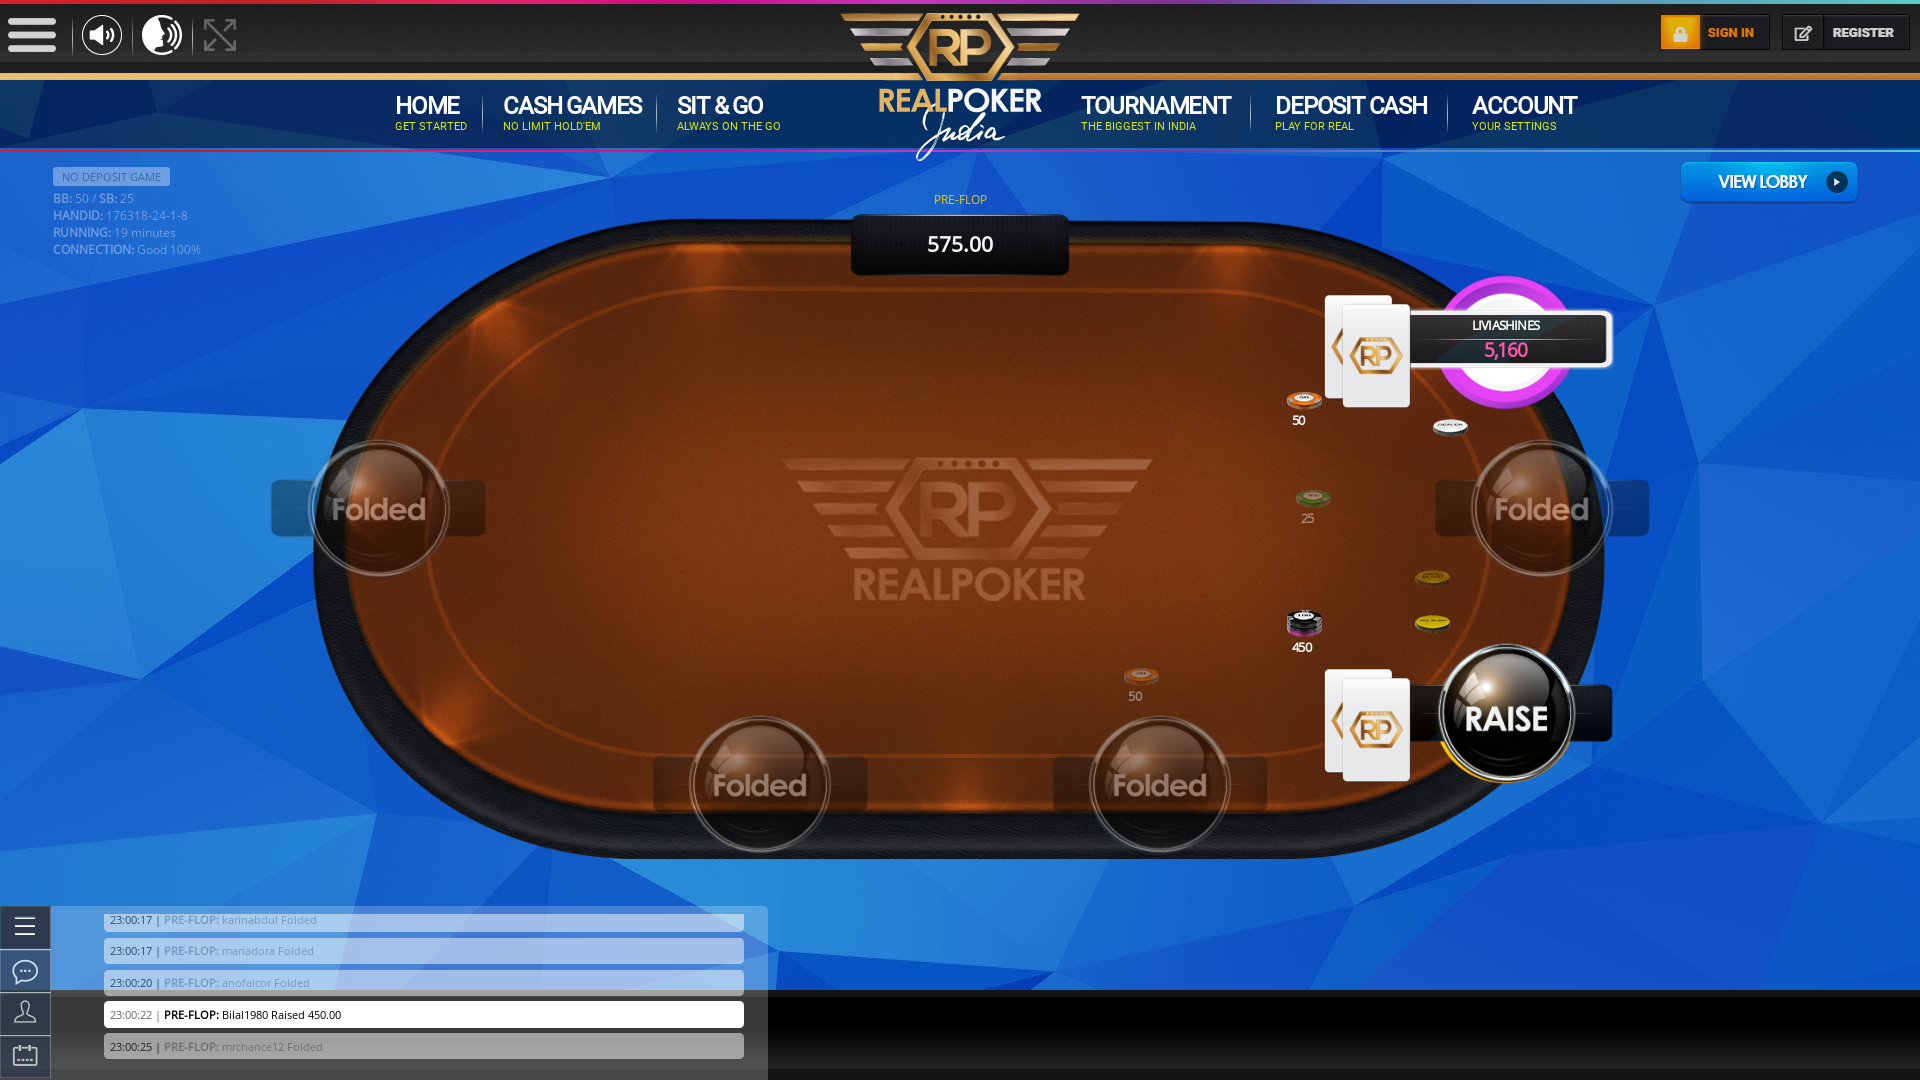 Real poker 10 player table in the 19th minute